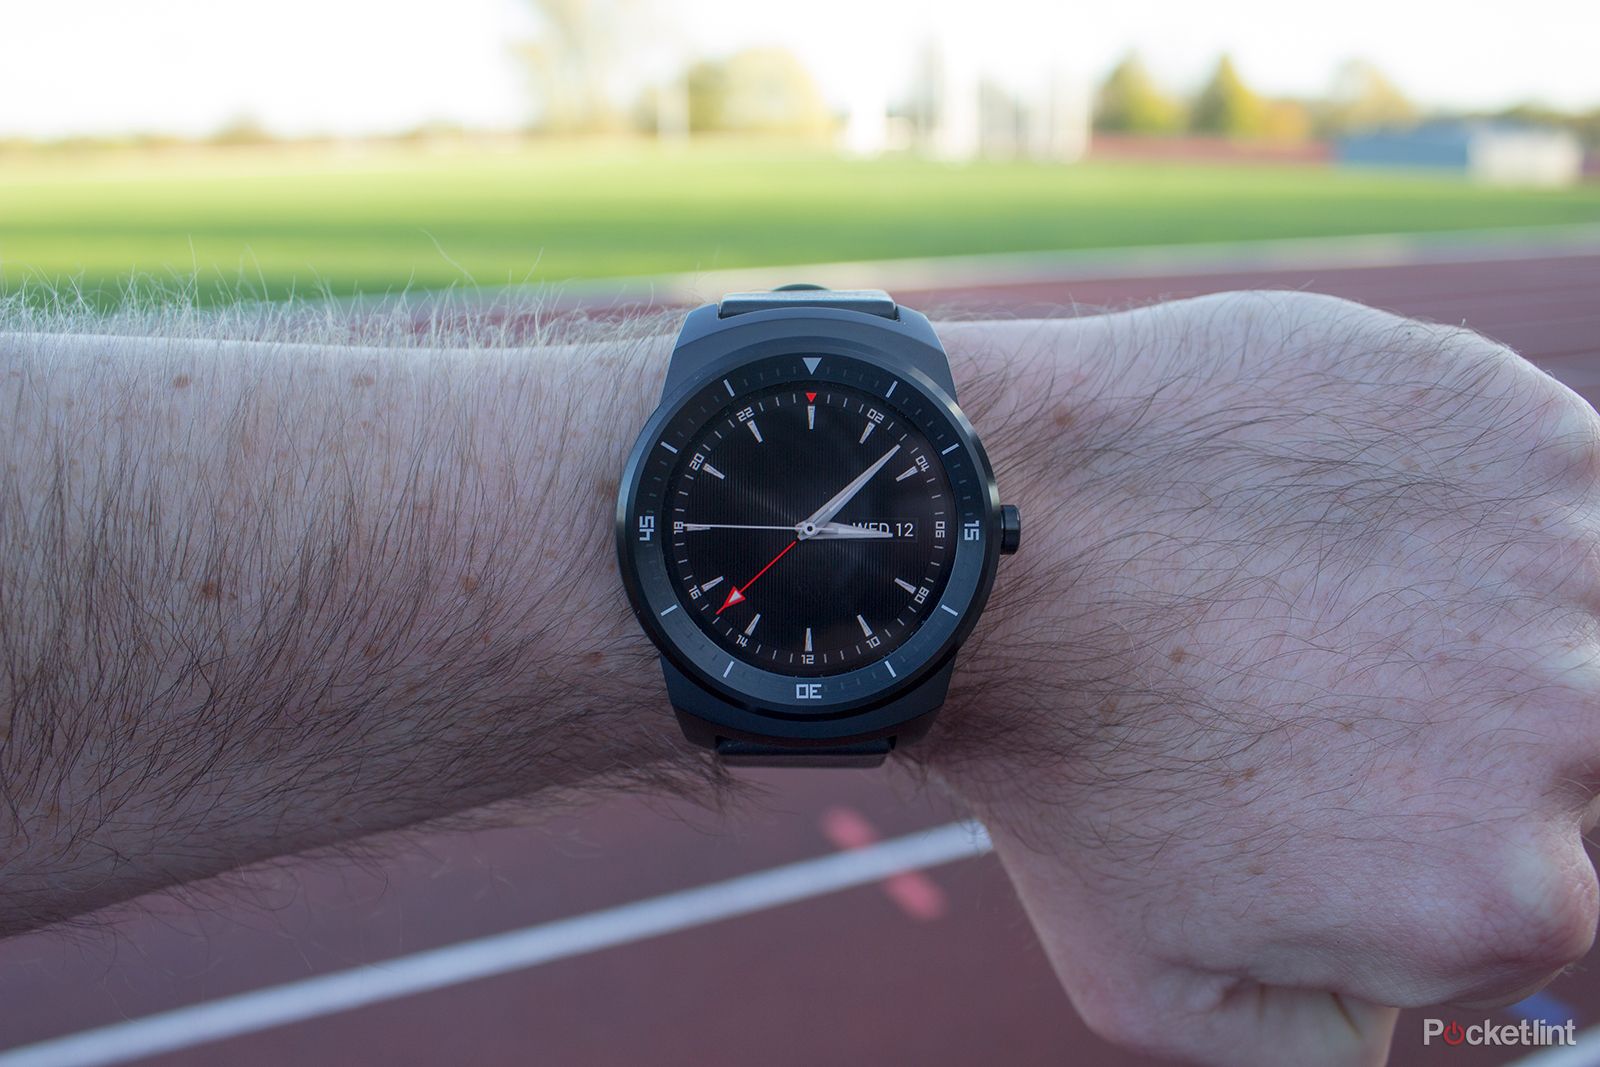 lg g watch r review image 3